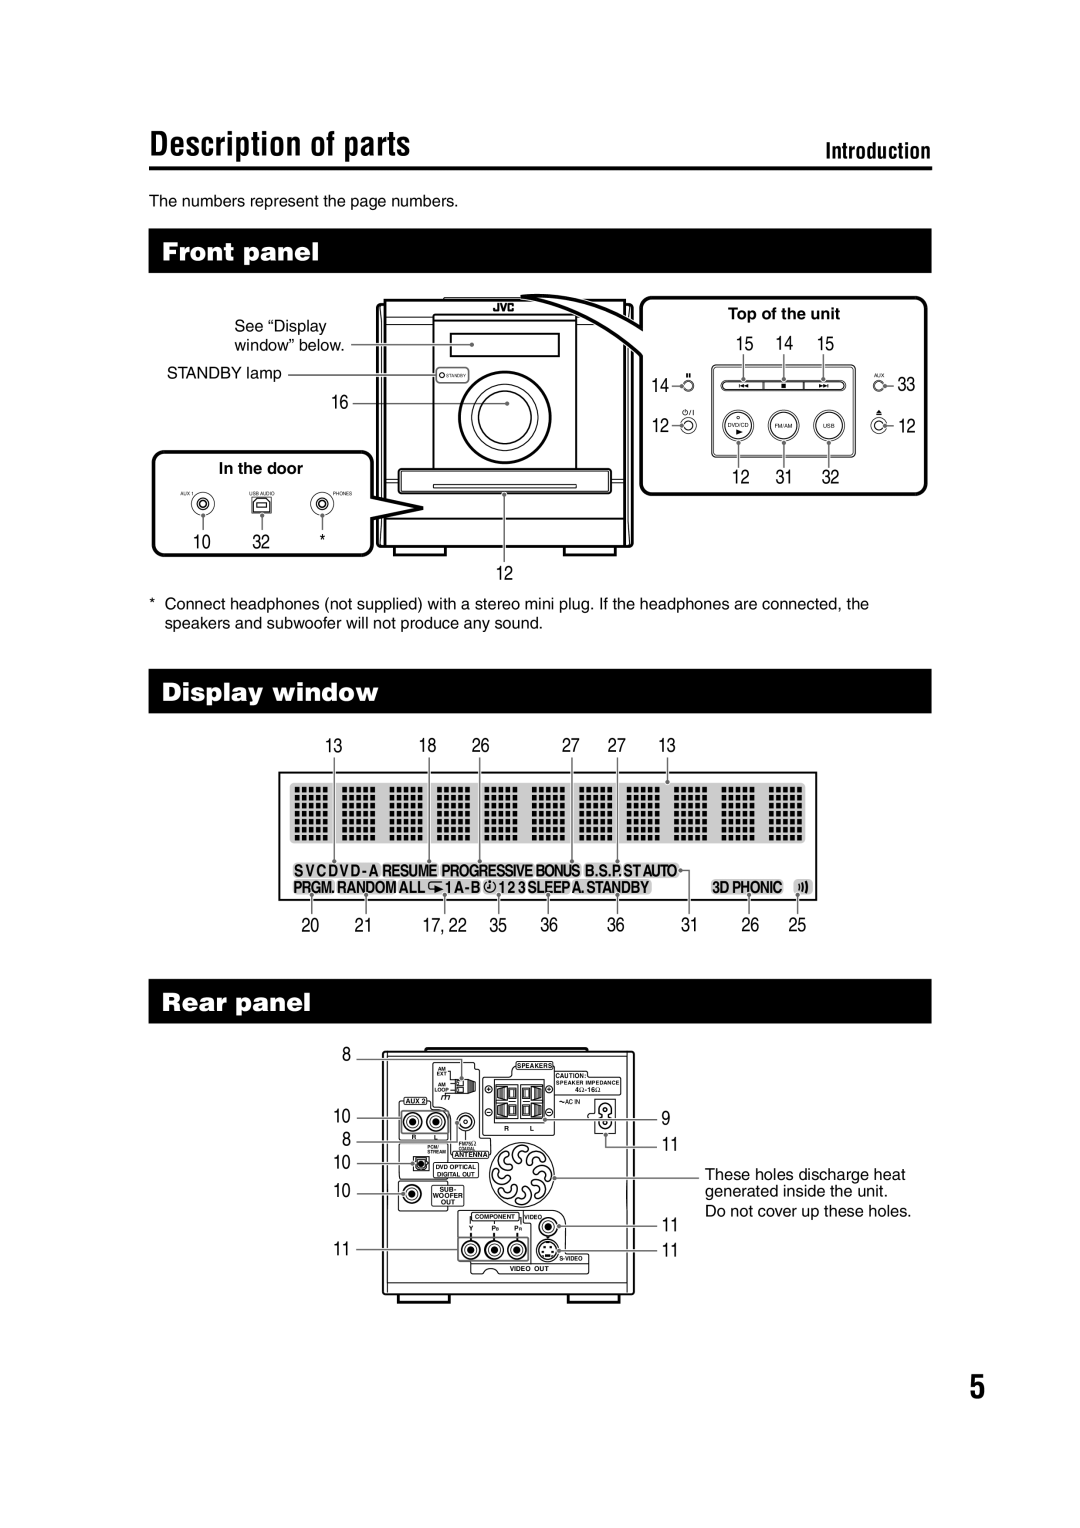 JVC GNT0066-001A manual Description of parts, Front panel, Display window, Rear panel, Introduction 